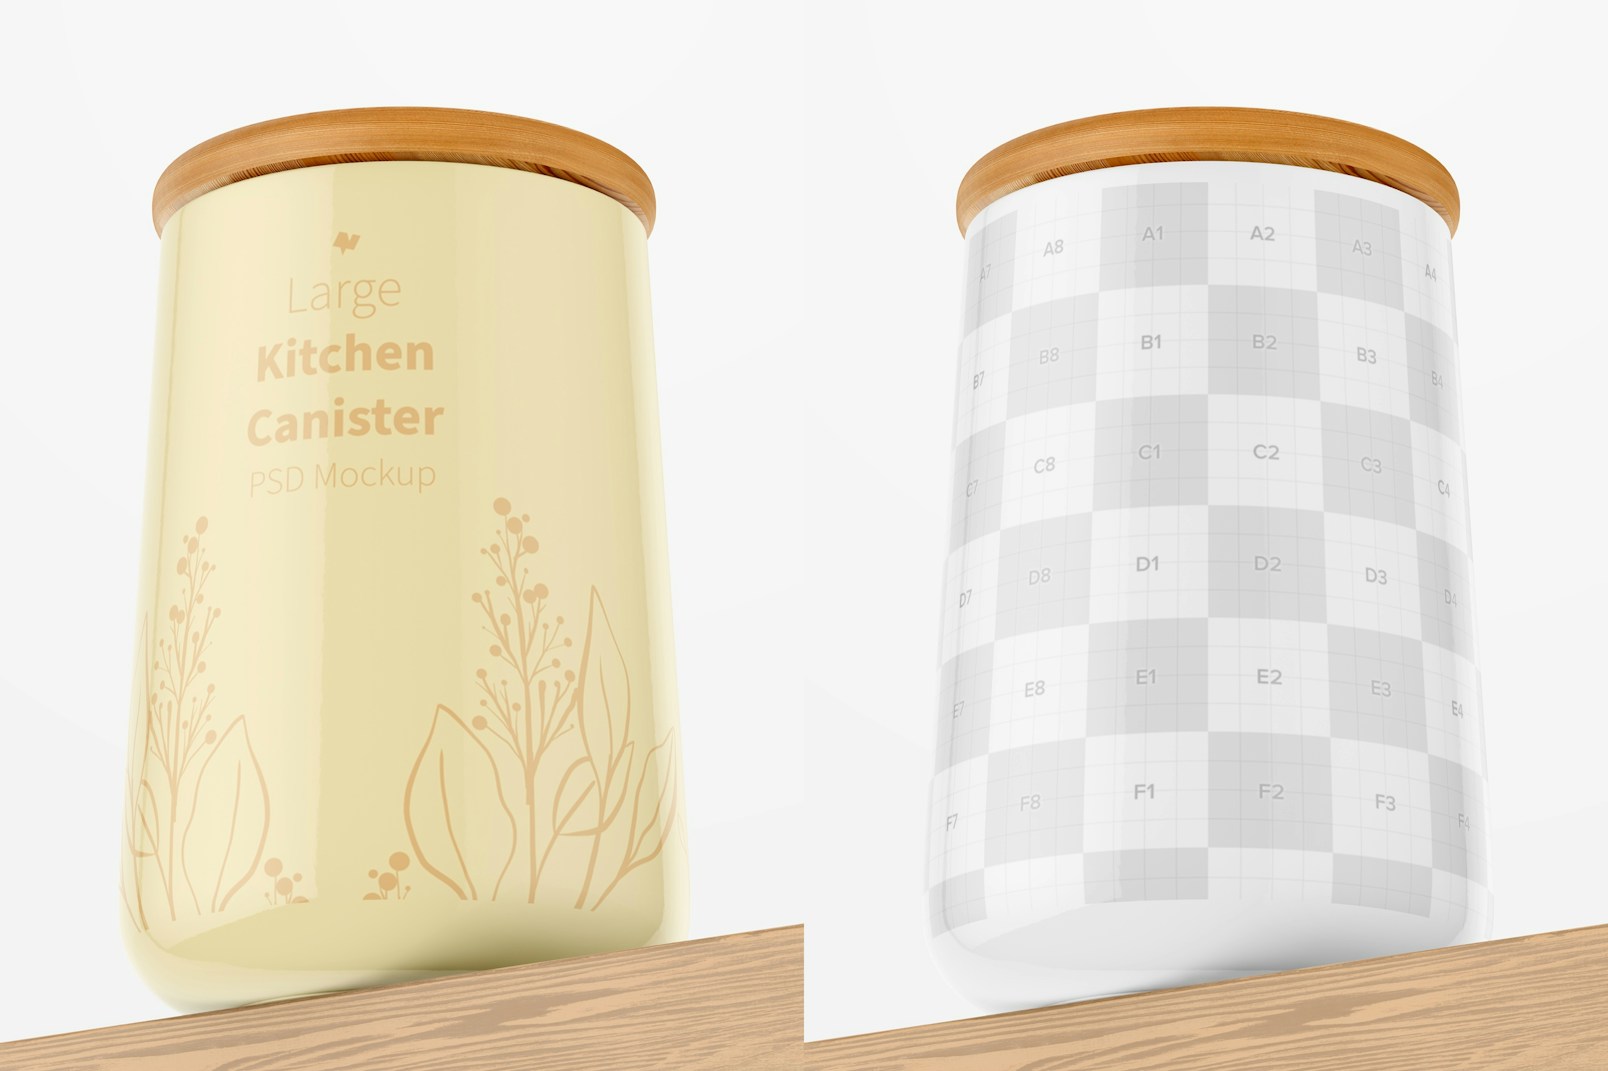 Large Kitchen Canister Mockup, Low Angle View